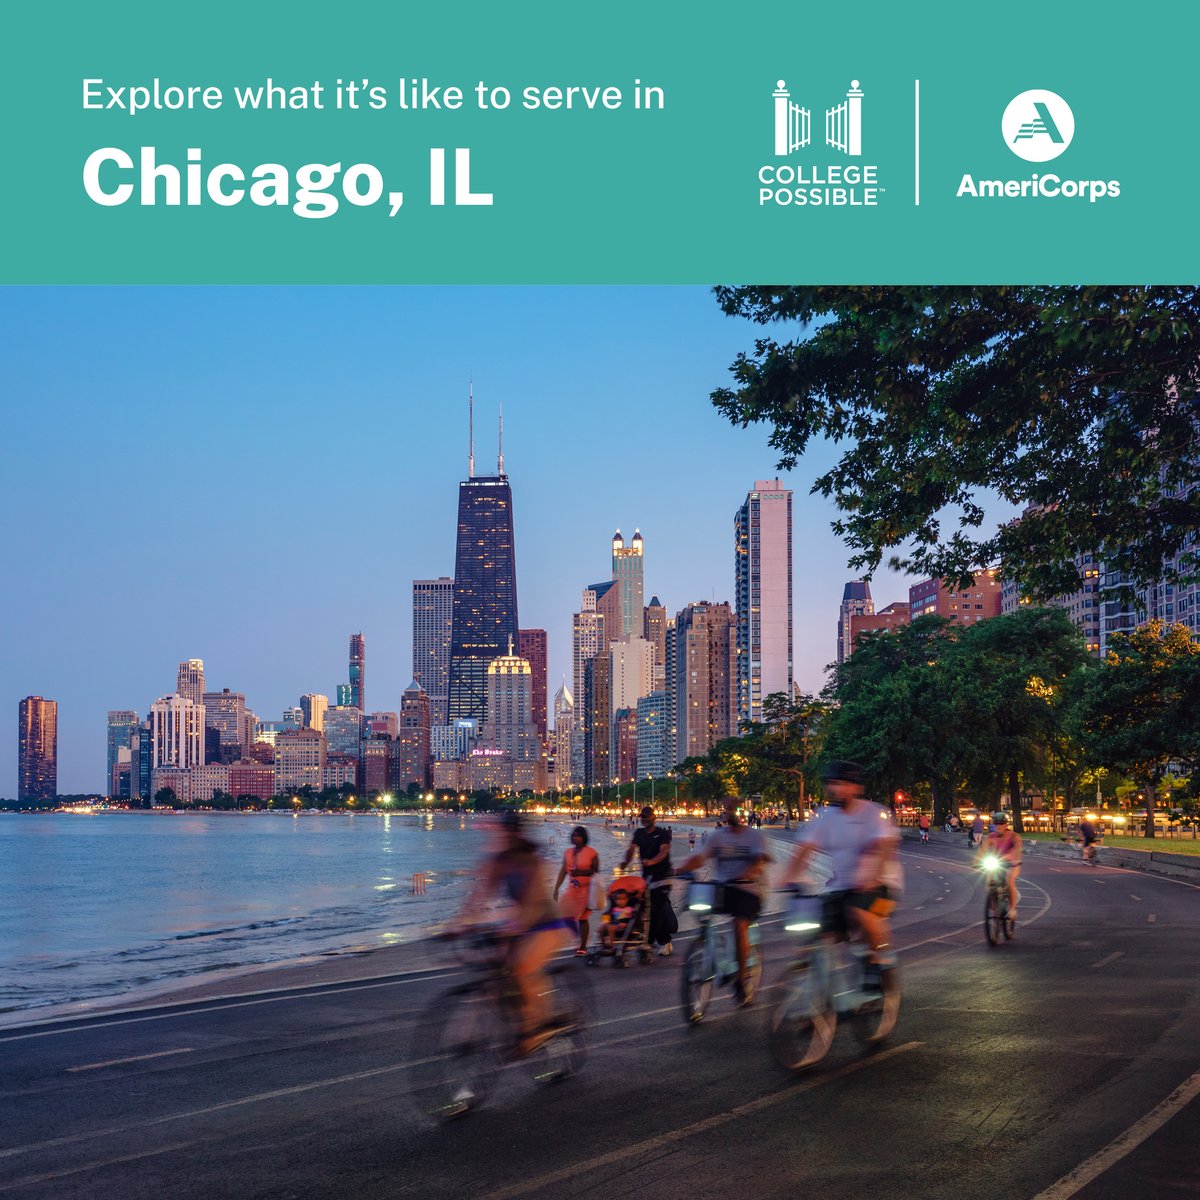 Considering @AmeriCorps service with @CollPossibleCHI? Check out how our coaches get to their service site, and enjoy their free time! From the scoop on which CTA line to take, to the Lakefront Trail, we cover it all in our Chicago site profile: bit.ly/3wWzxMU